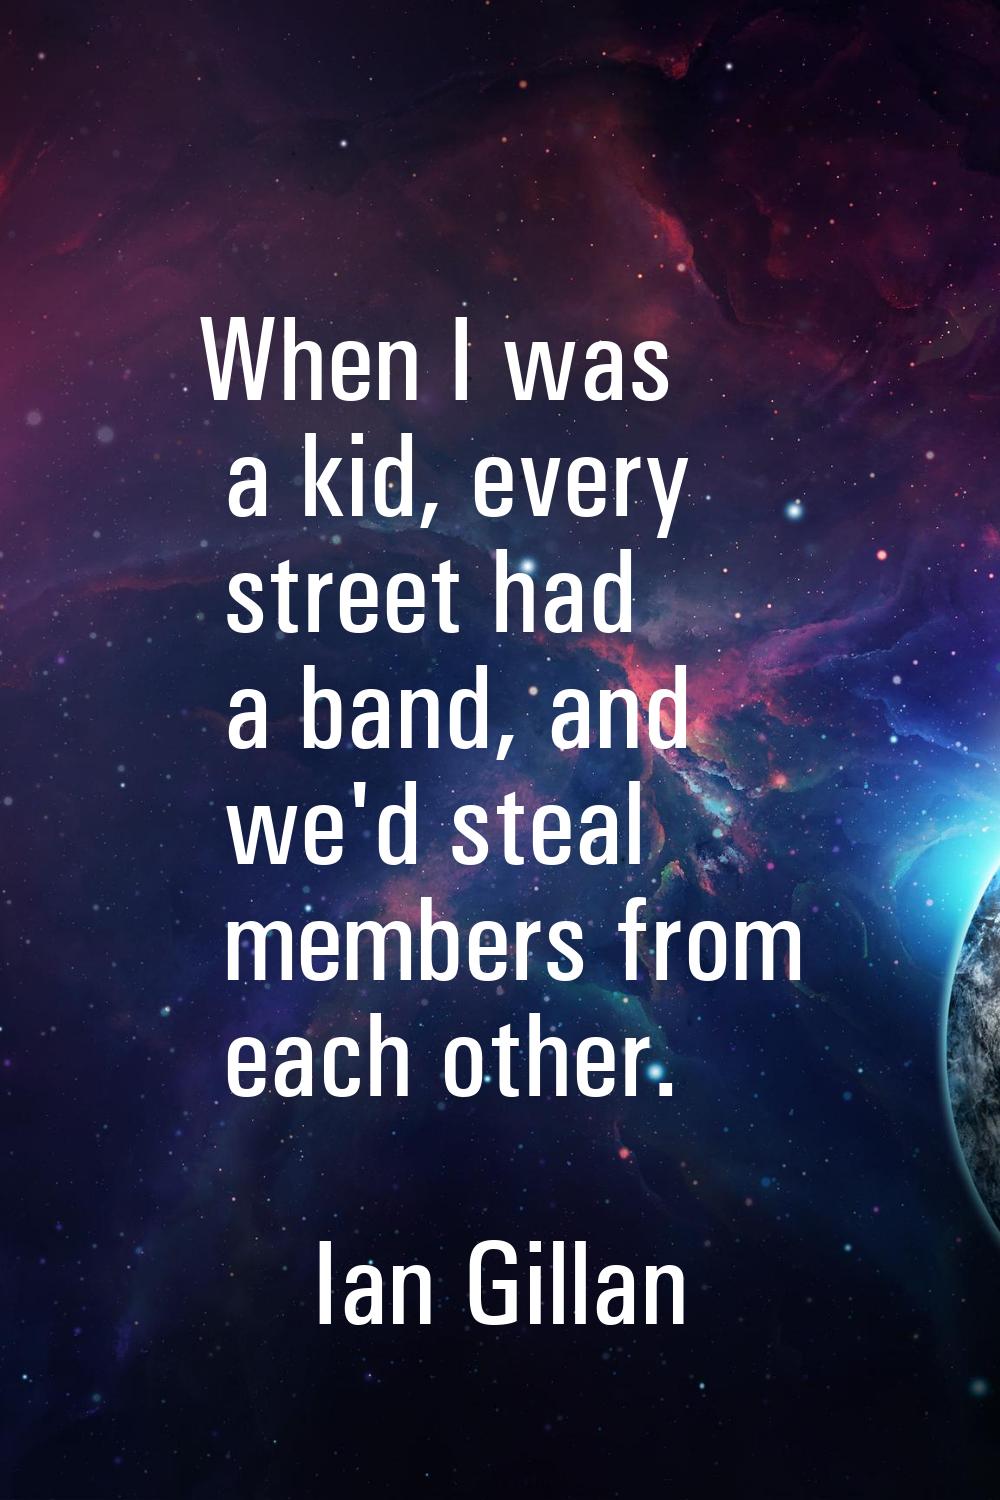 When I was a kid, every street had a band, and we'd steal members from each other.